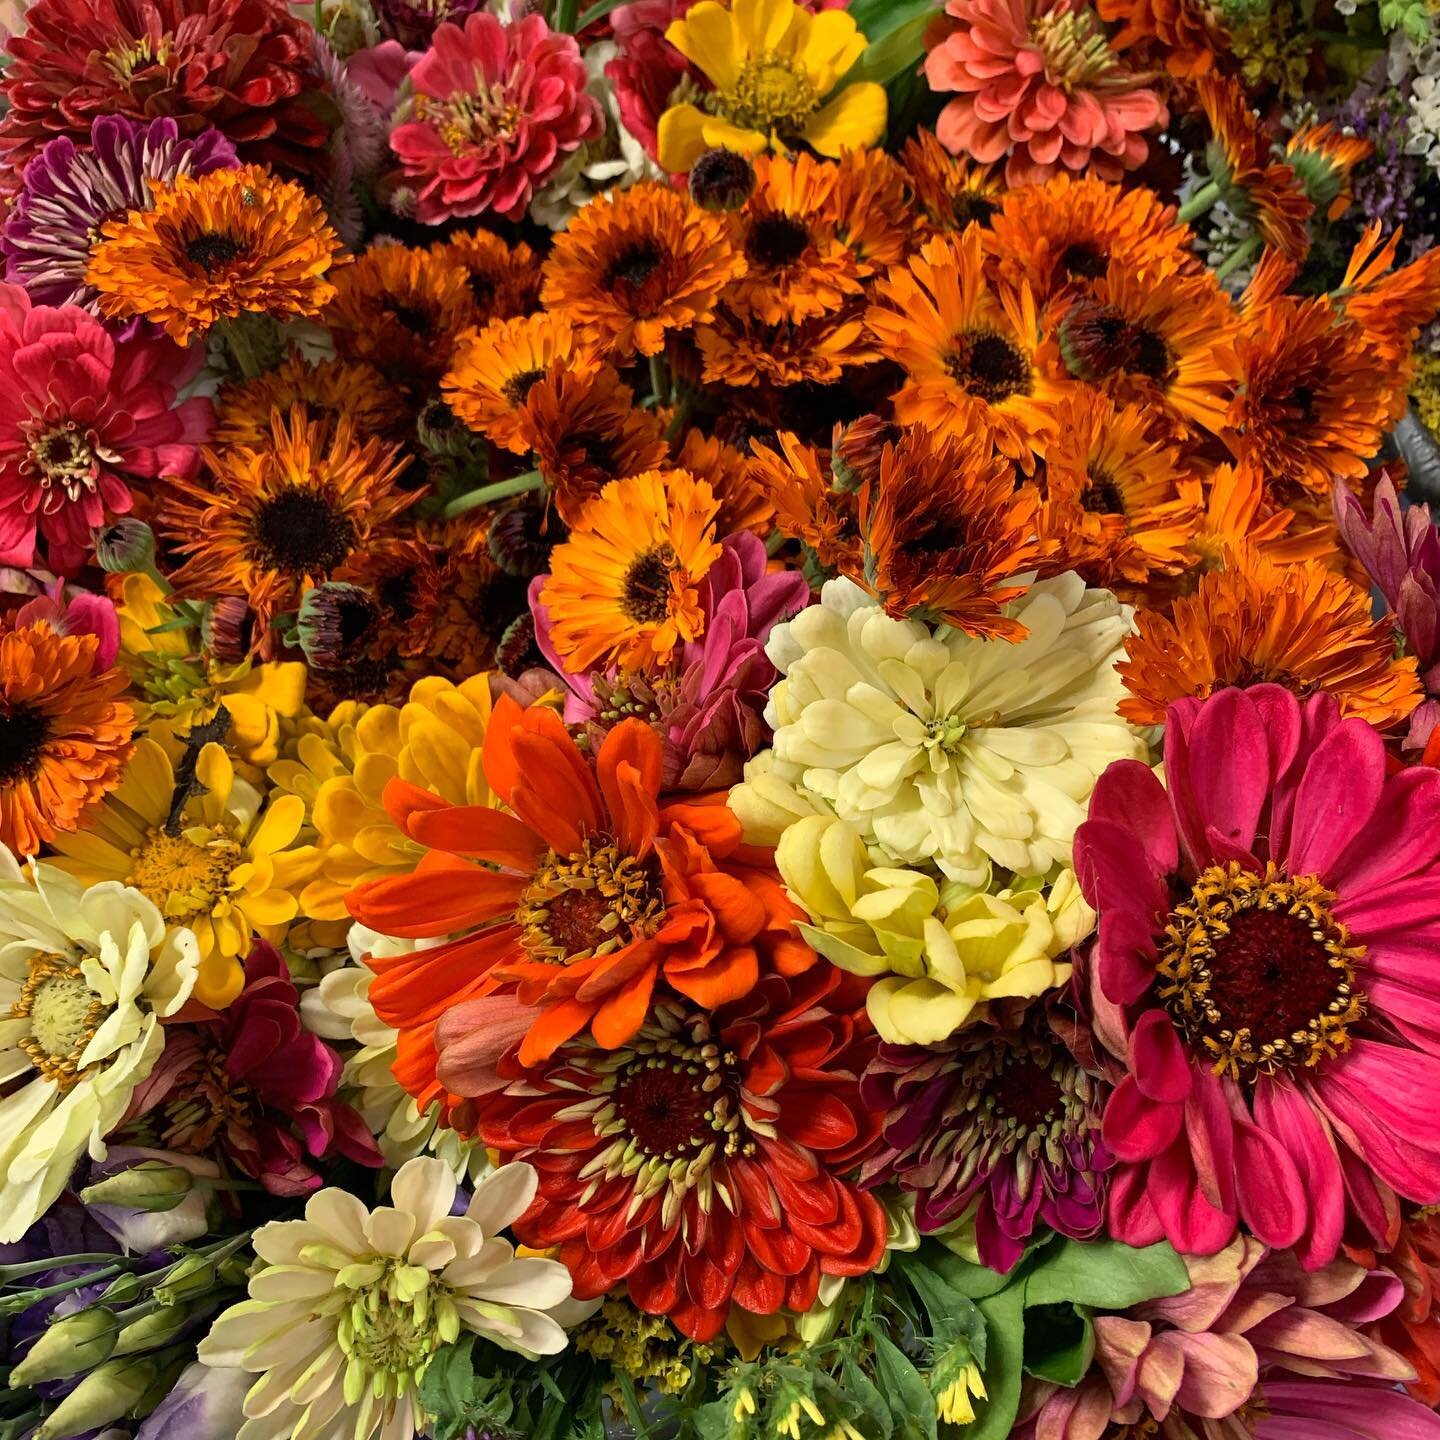 These Fresh cut flowers are sure to bring a rainy day. Just five dollars a bunch!